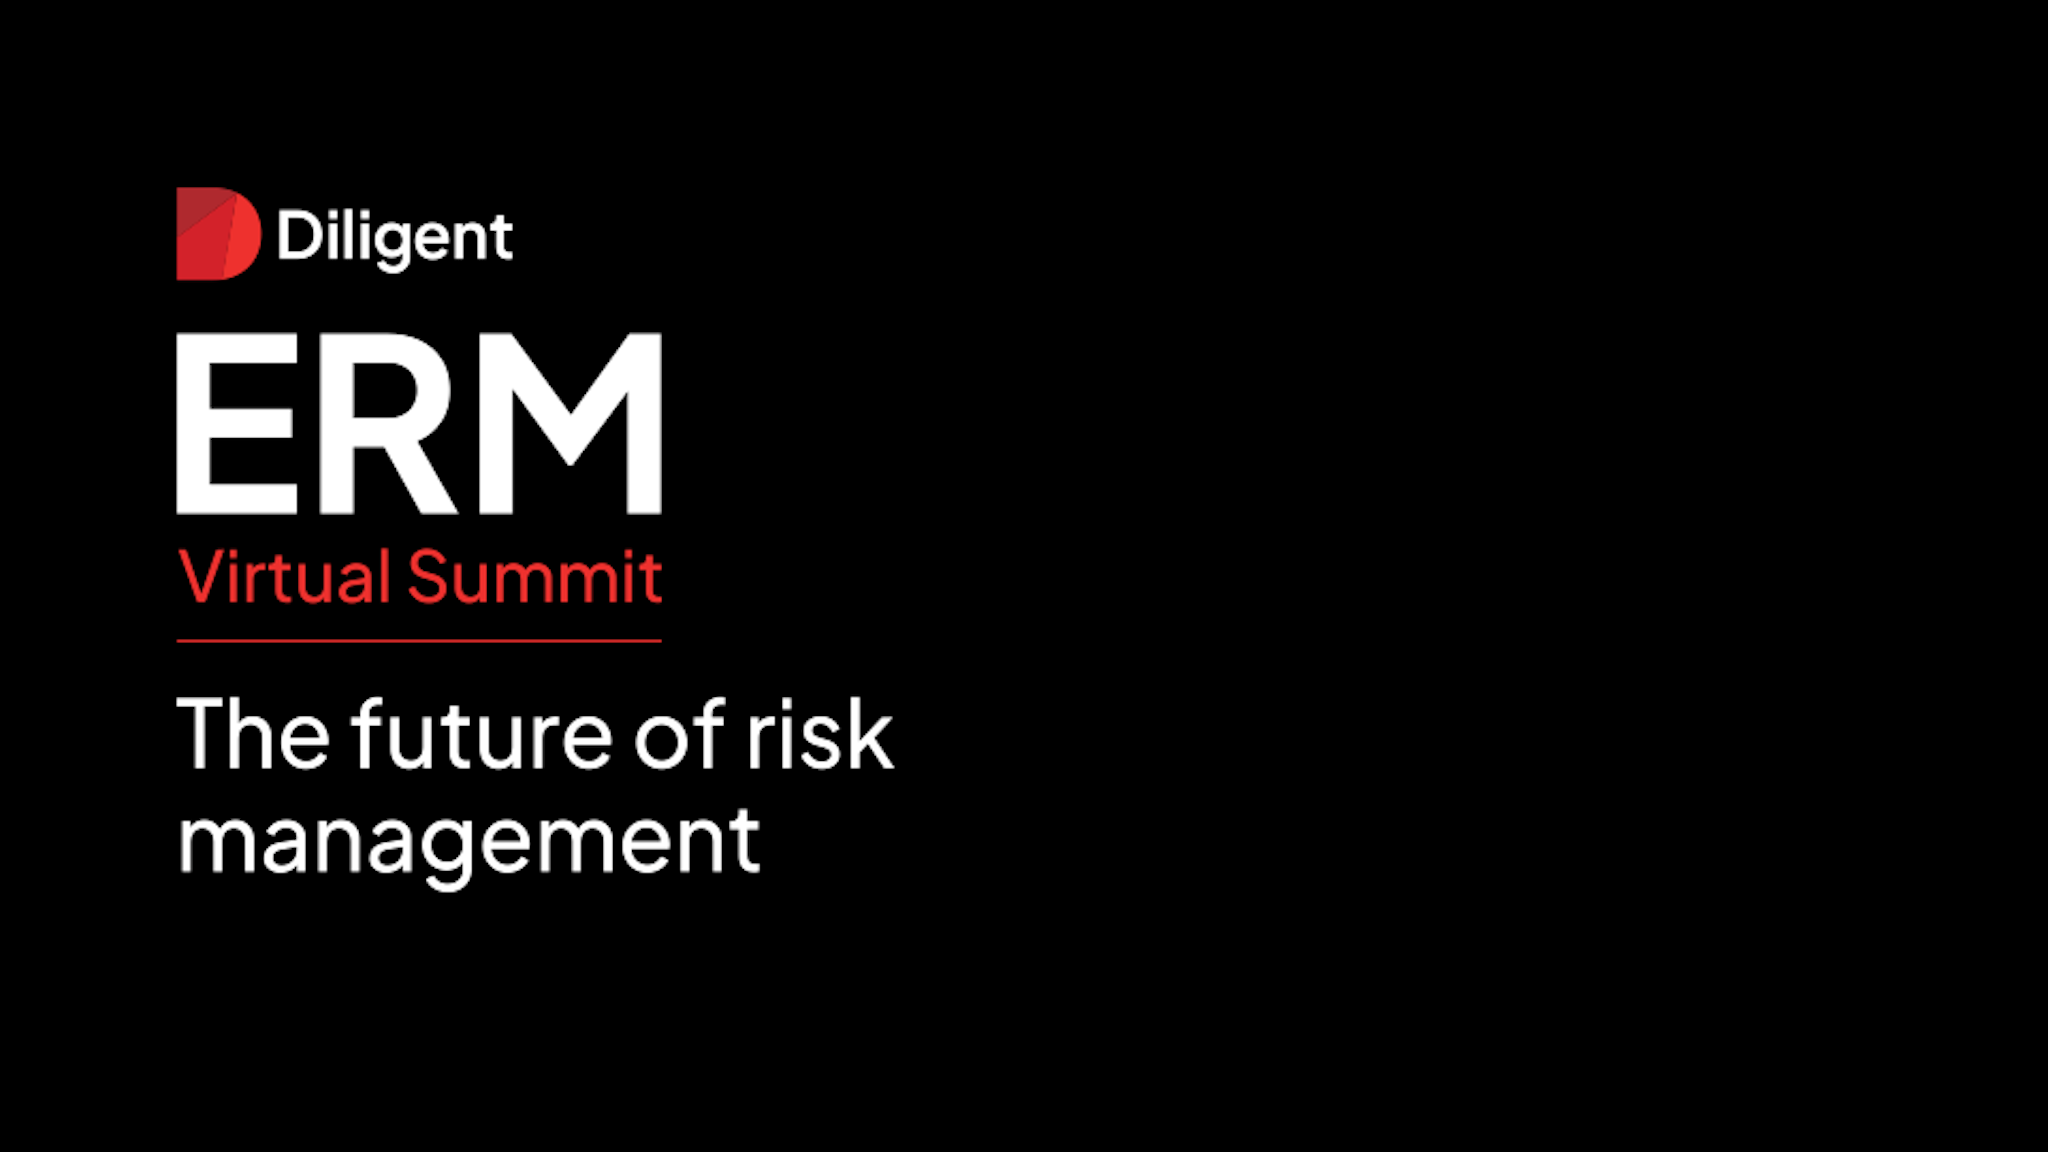 ERM Virtual Summit logo with the words "The future of risk management"